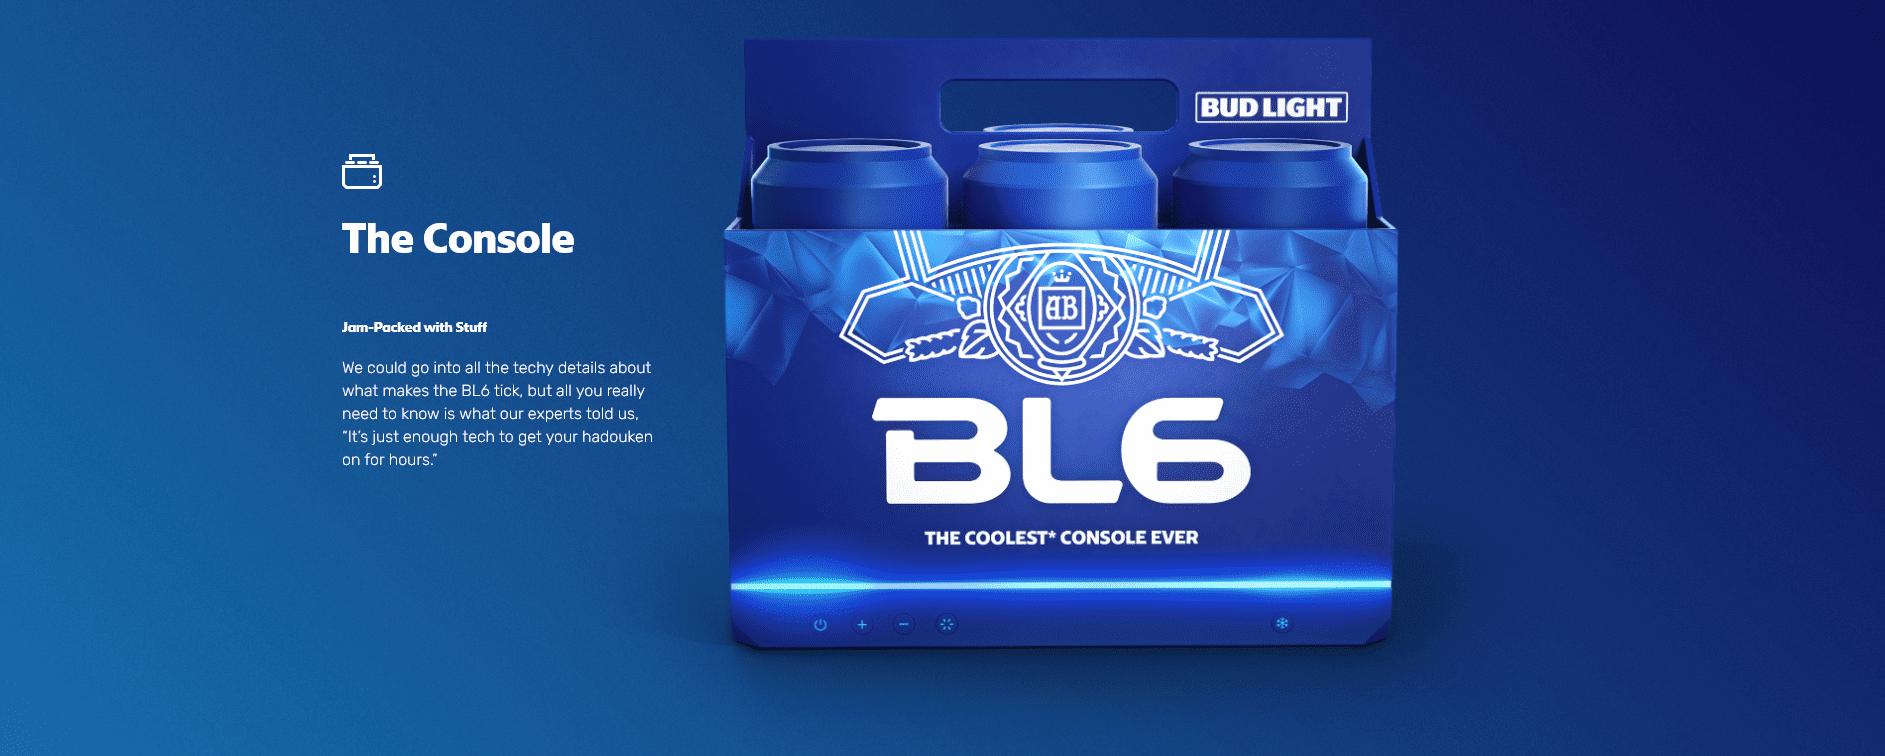 Bud Light Announces A Next-Gen, “Beer Cooled” Console